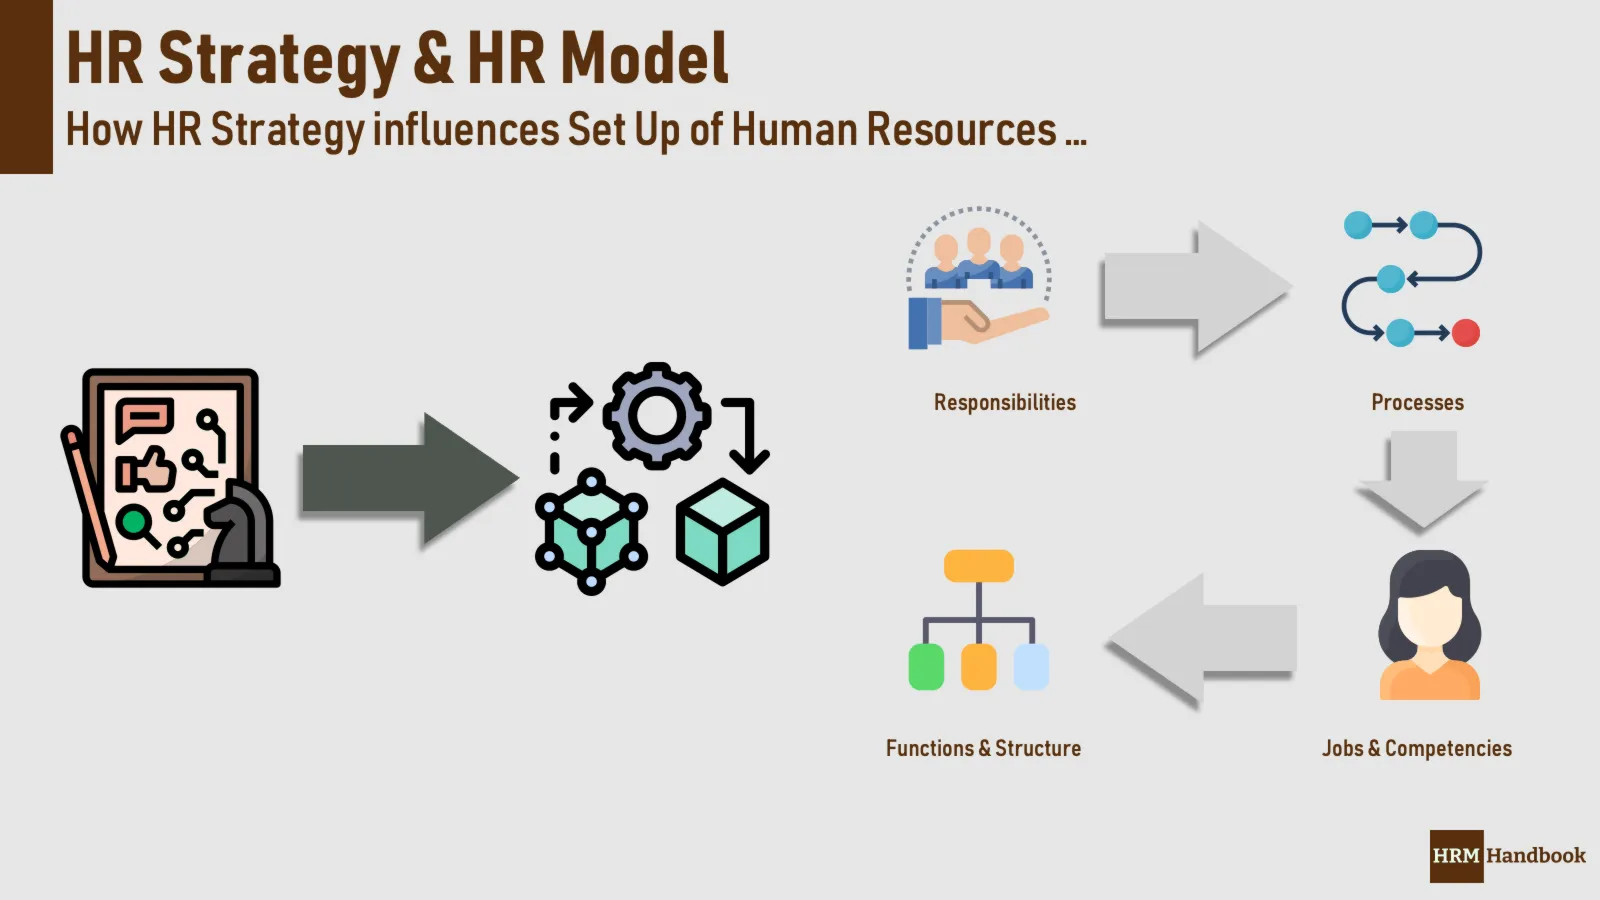 How HR Strategy impacts HR Model and how the model should be designed right.